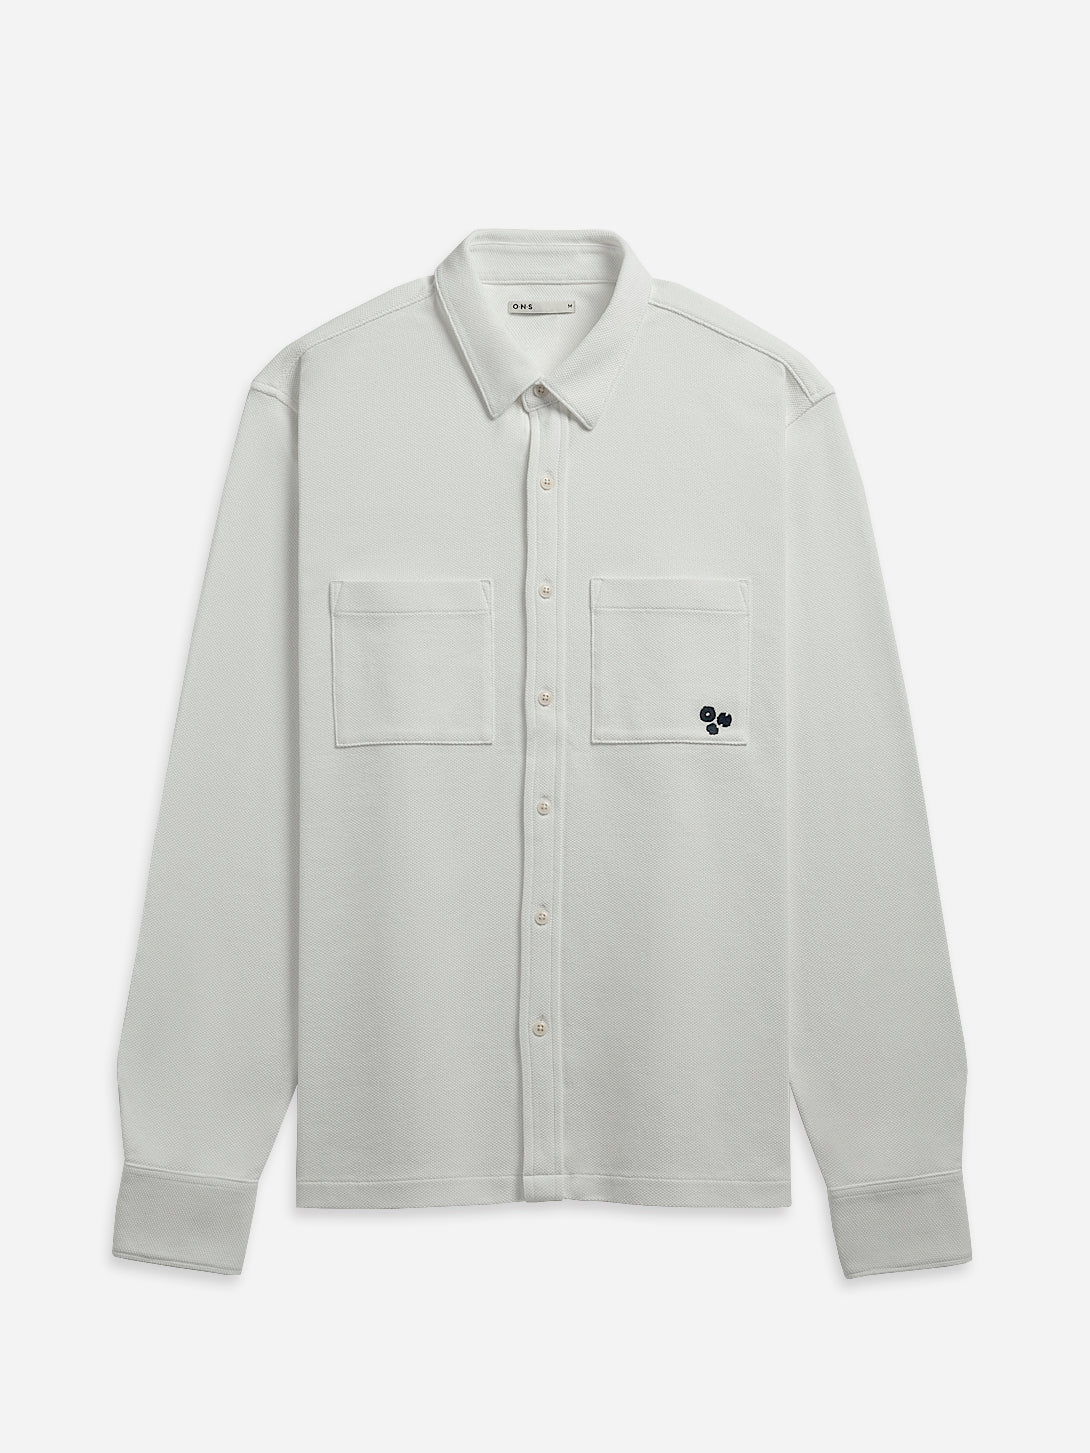 Off White Vance Pique Mens O.N.S Button Up Long Sleeve Knit Shirt 